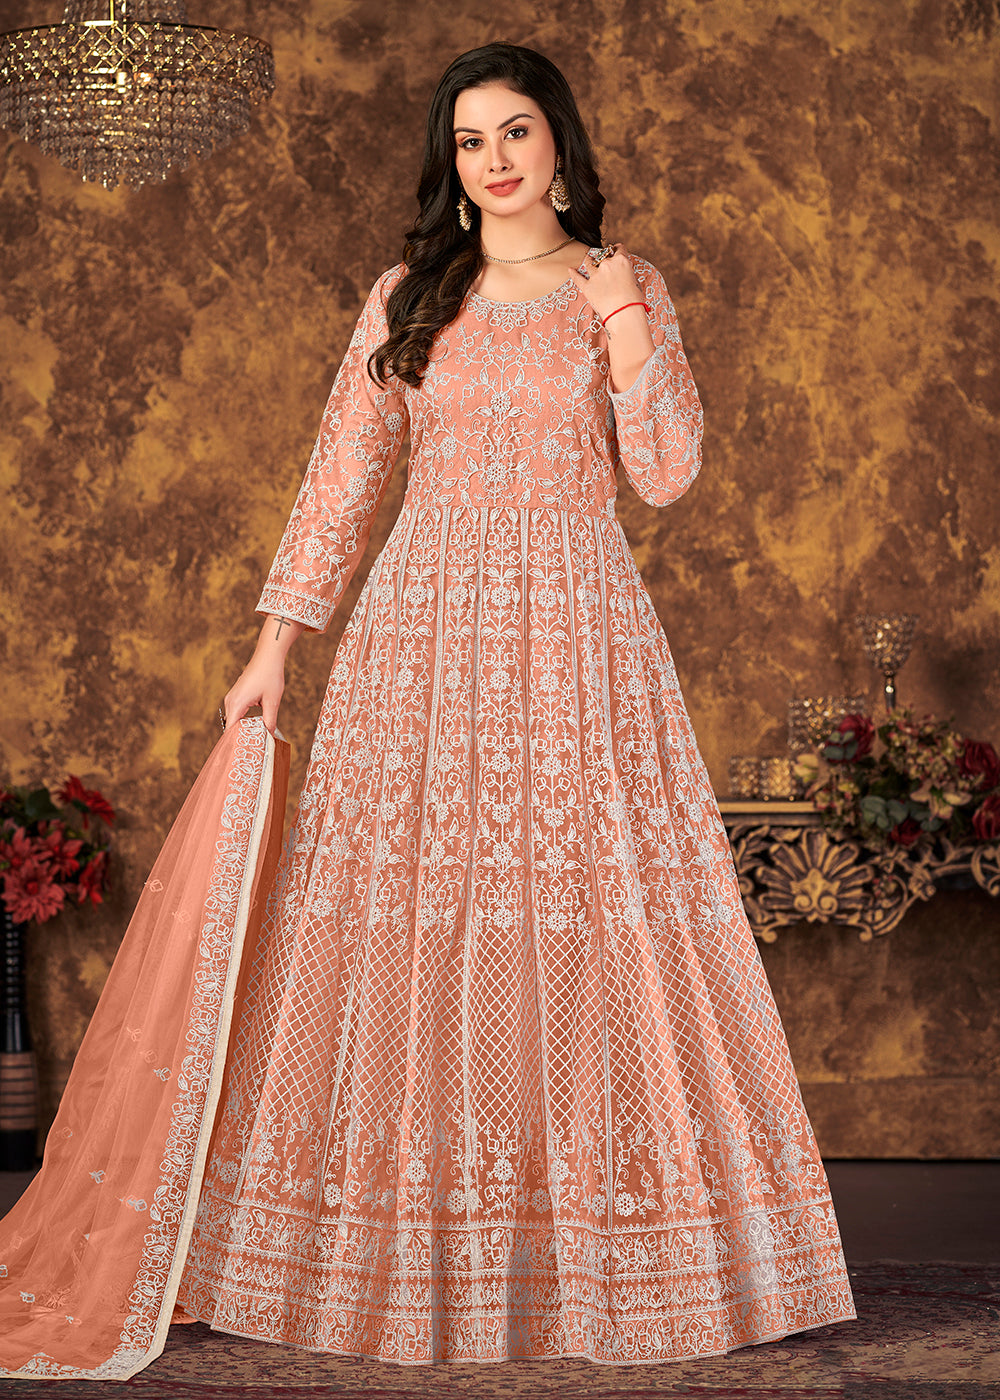 Buy Now Brilliant Peach Cording Embroidered Wedding Anarkali Dress Online in Canada at Empress Clothing. 